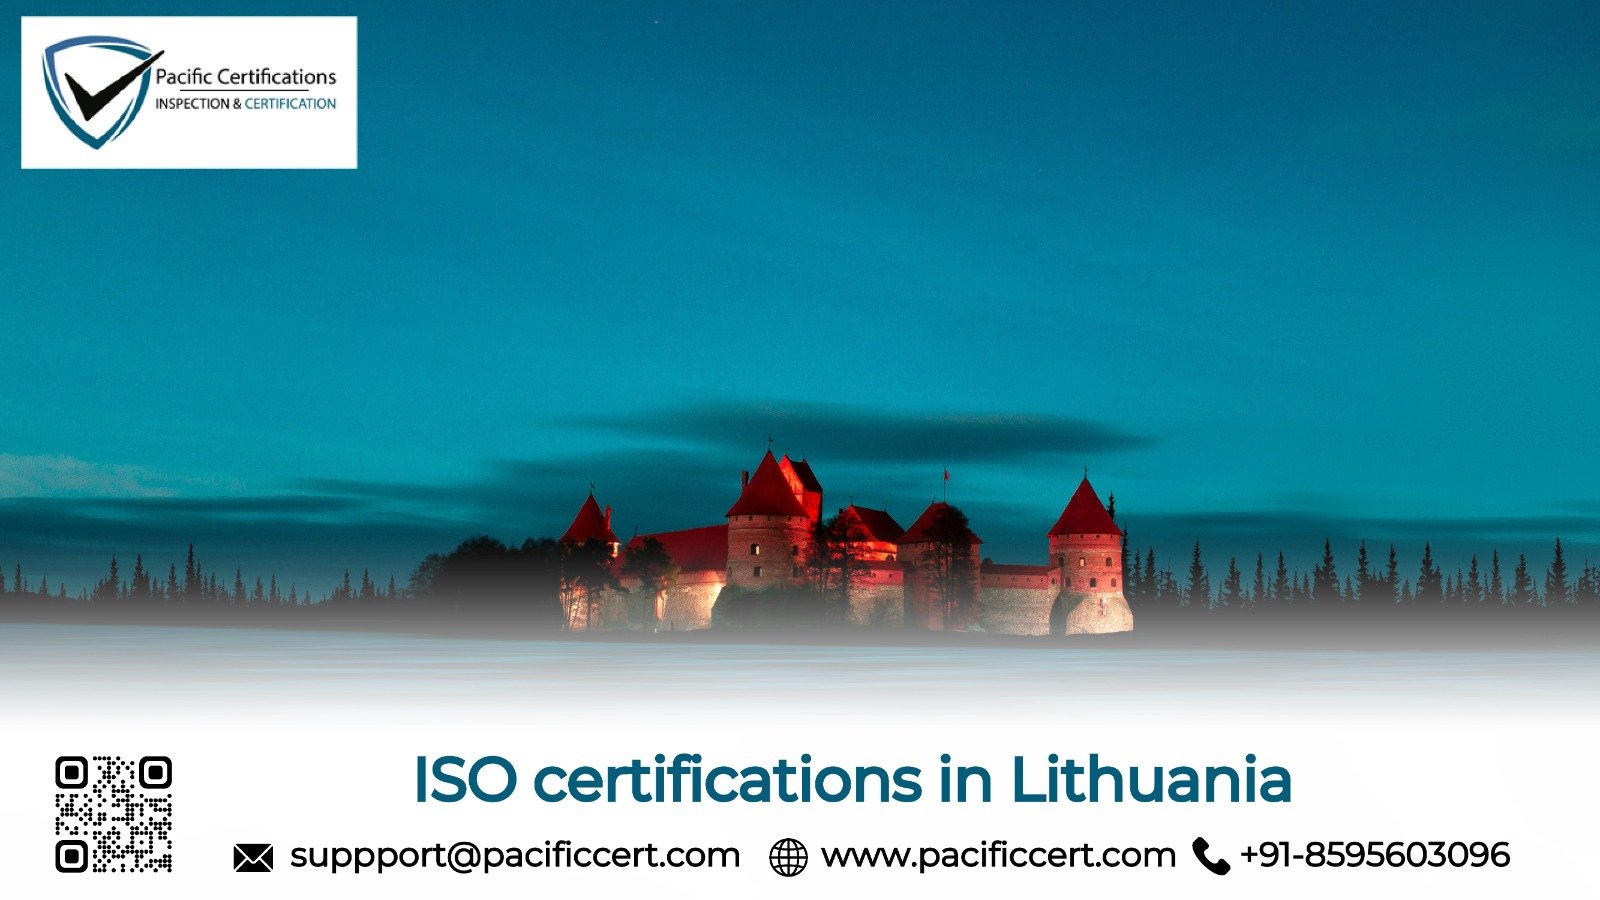 ISO Certifications in Lithuania and How Pacific Certifications can help